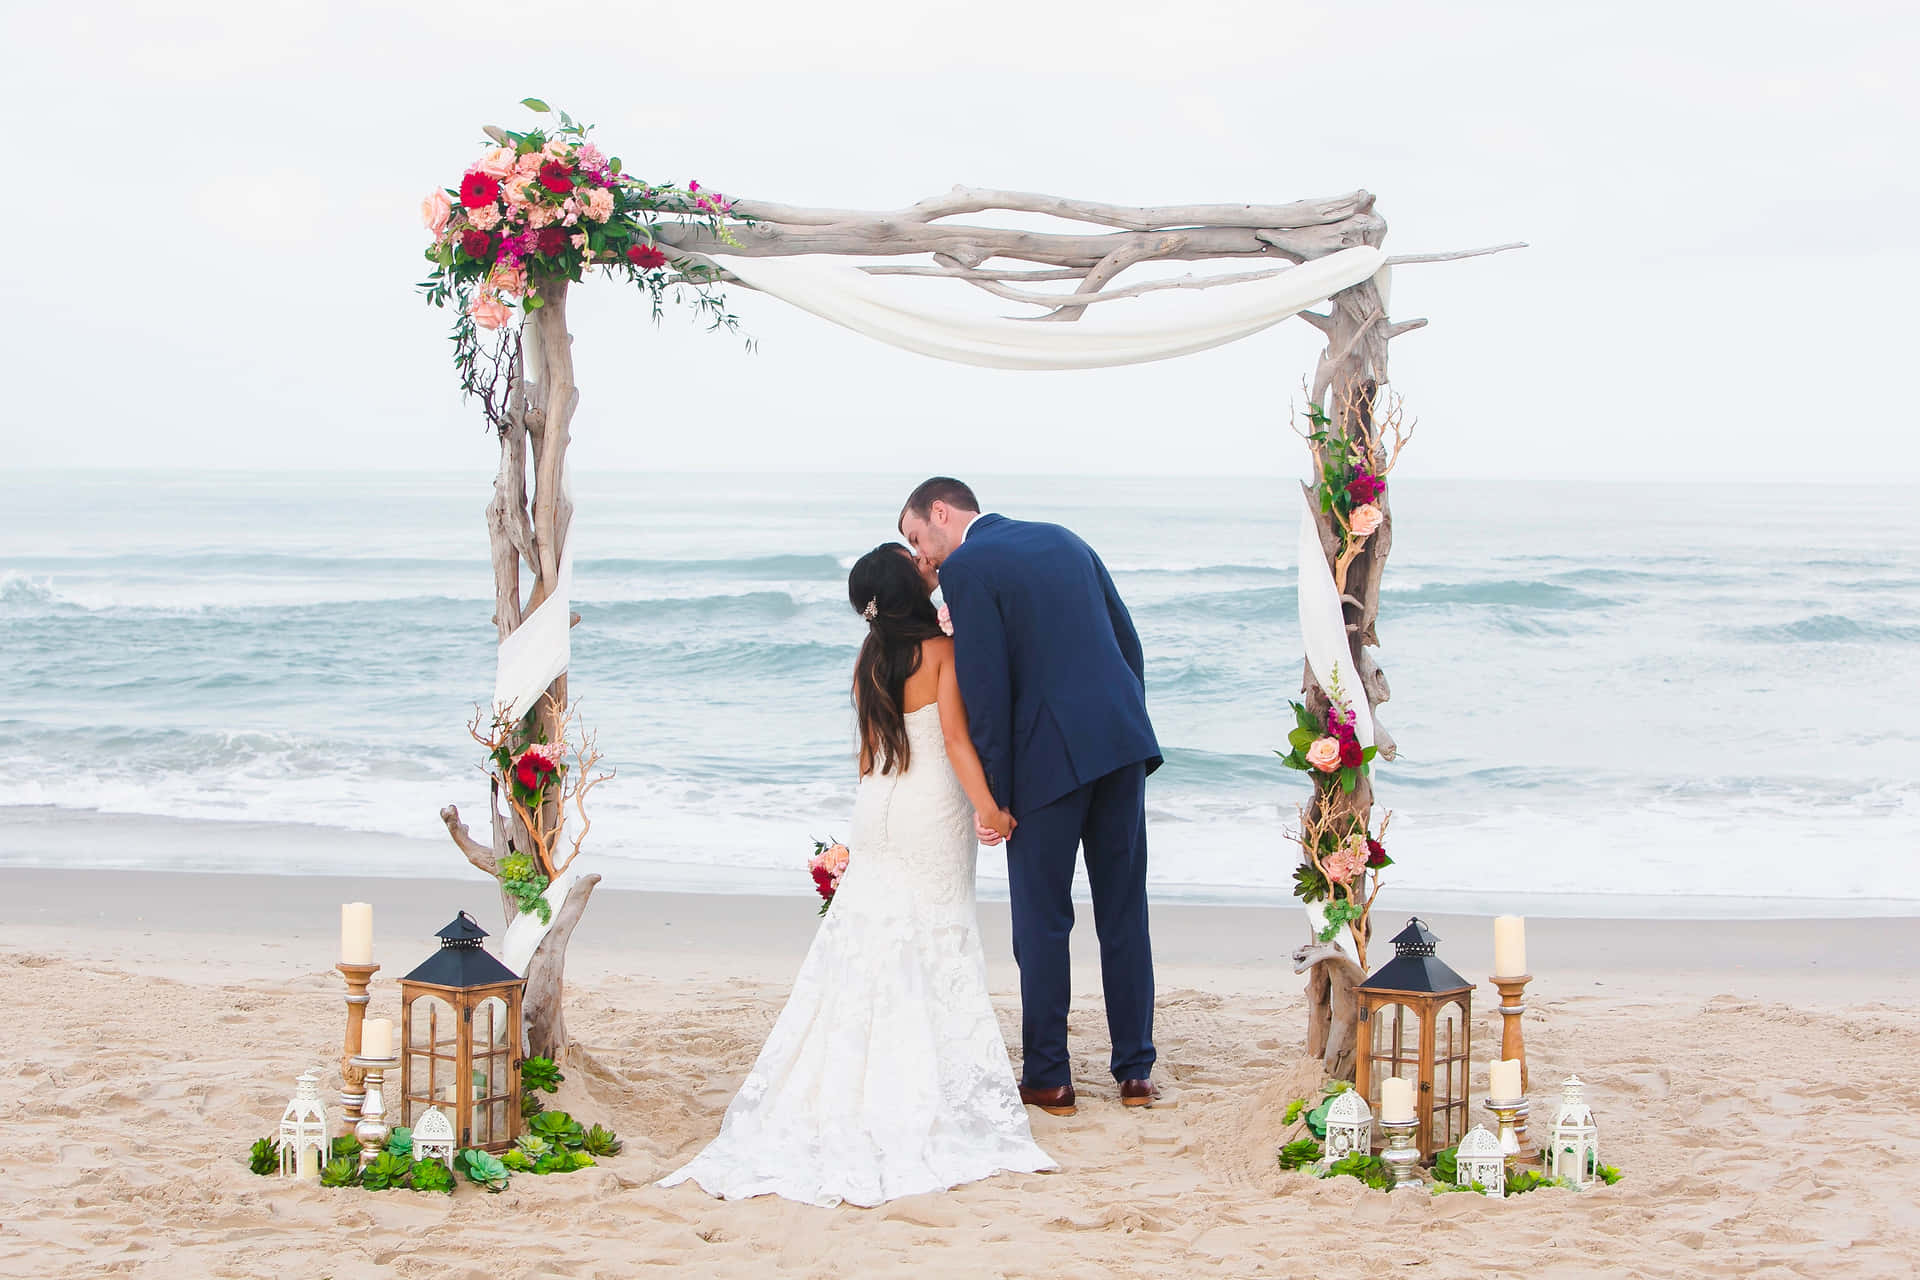 A Fairytale Moment - Loving Couple Exchanging Vows During A Stunning Beach Wedding. Wallpaper